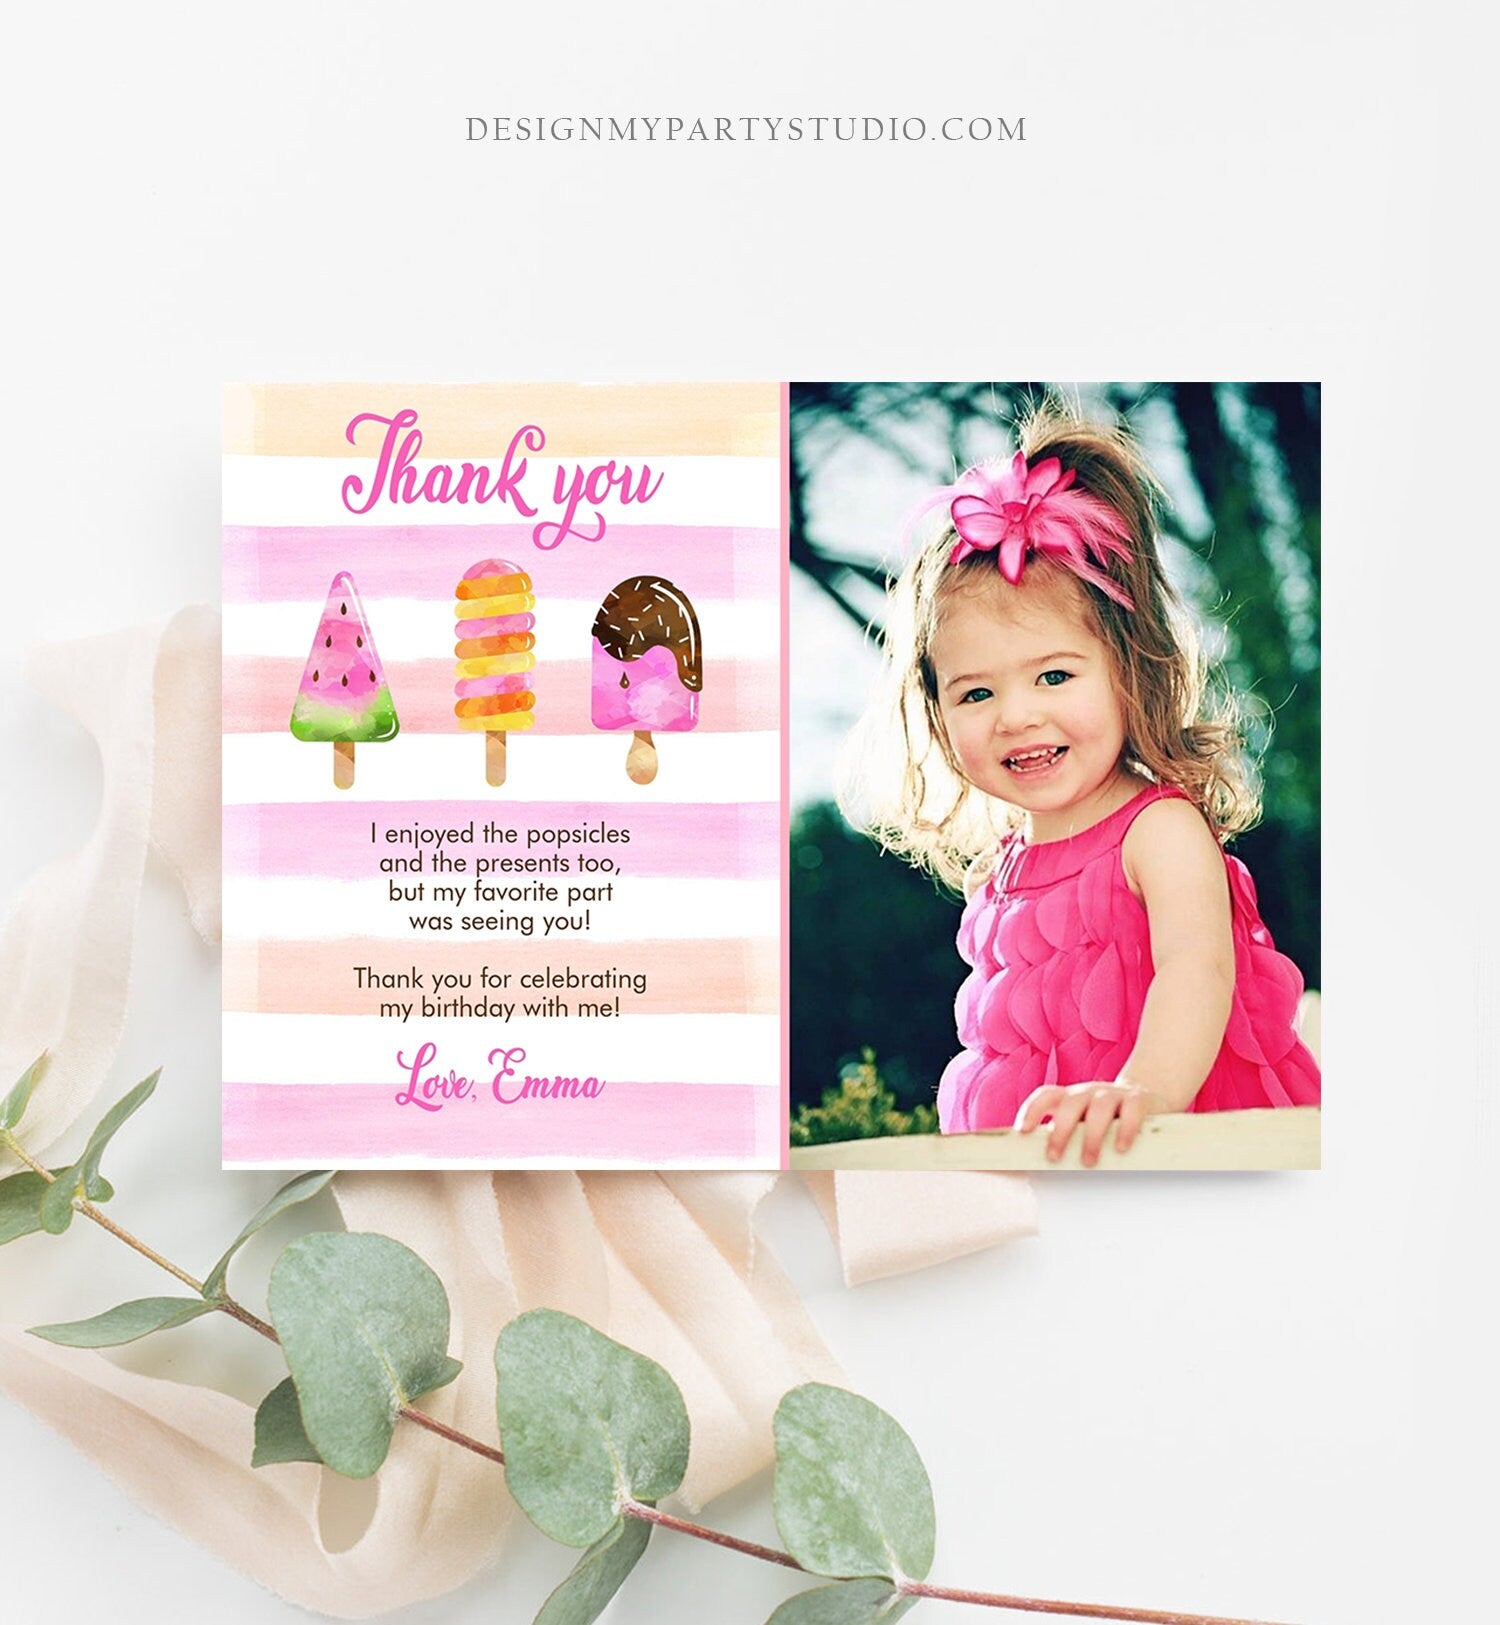 Editable Thank You Card Popsicle Thank you Note Popsicle Birthday Photo Girl Summer Ice Cream Party Download Printable Template Corjl 0143